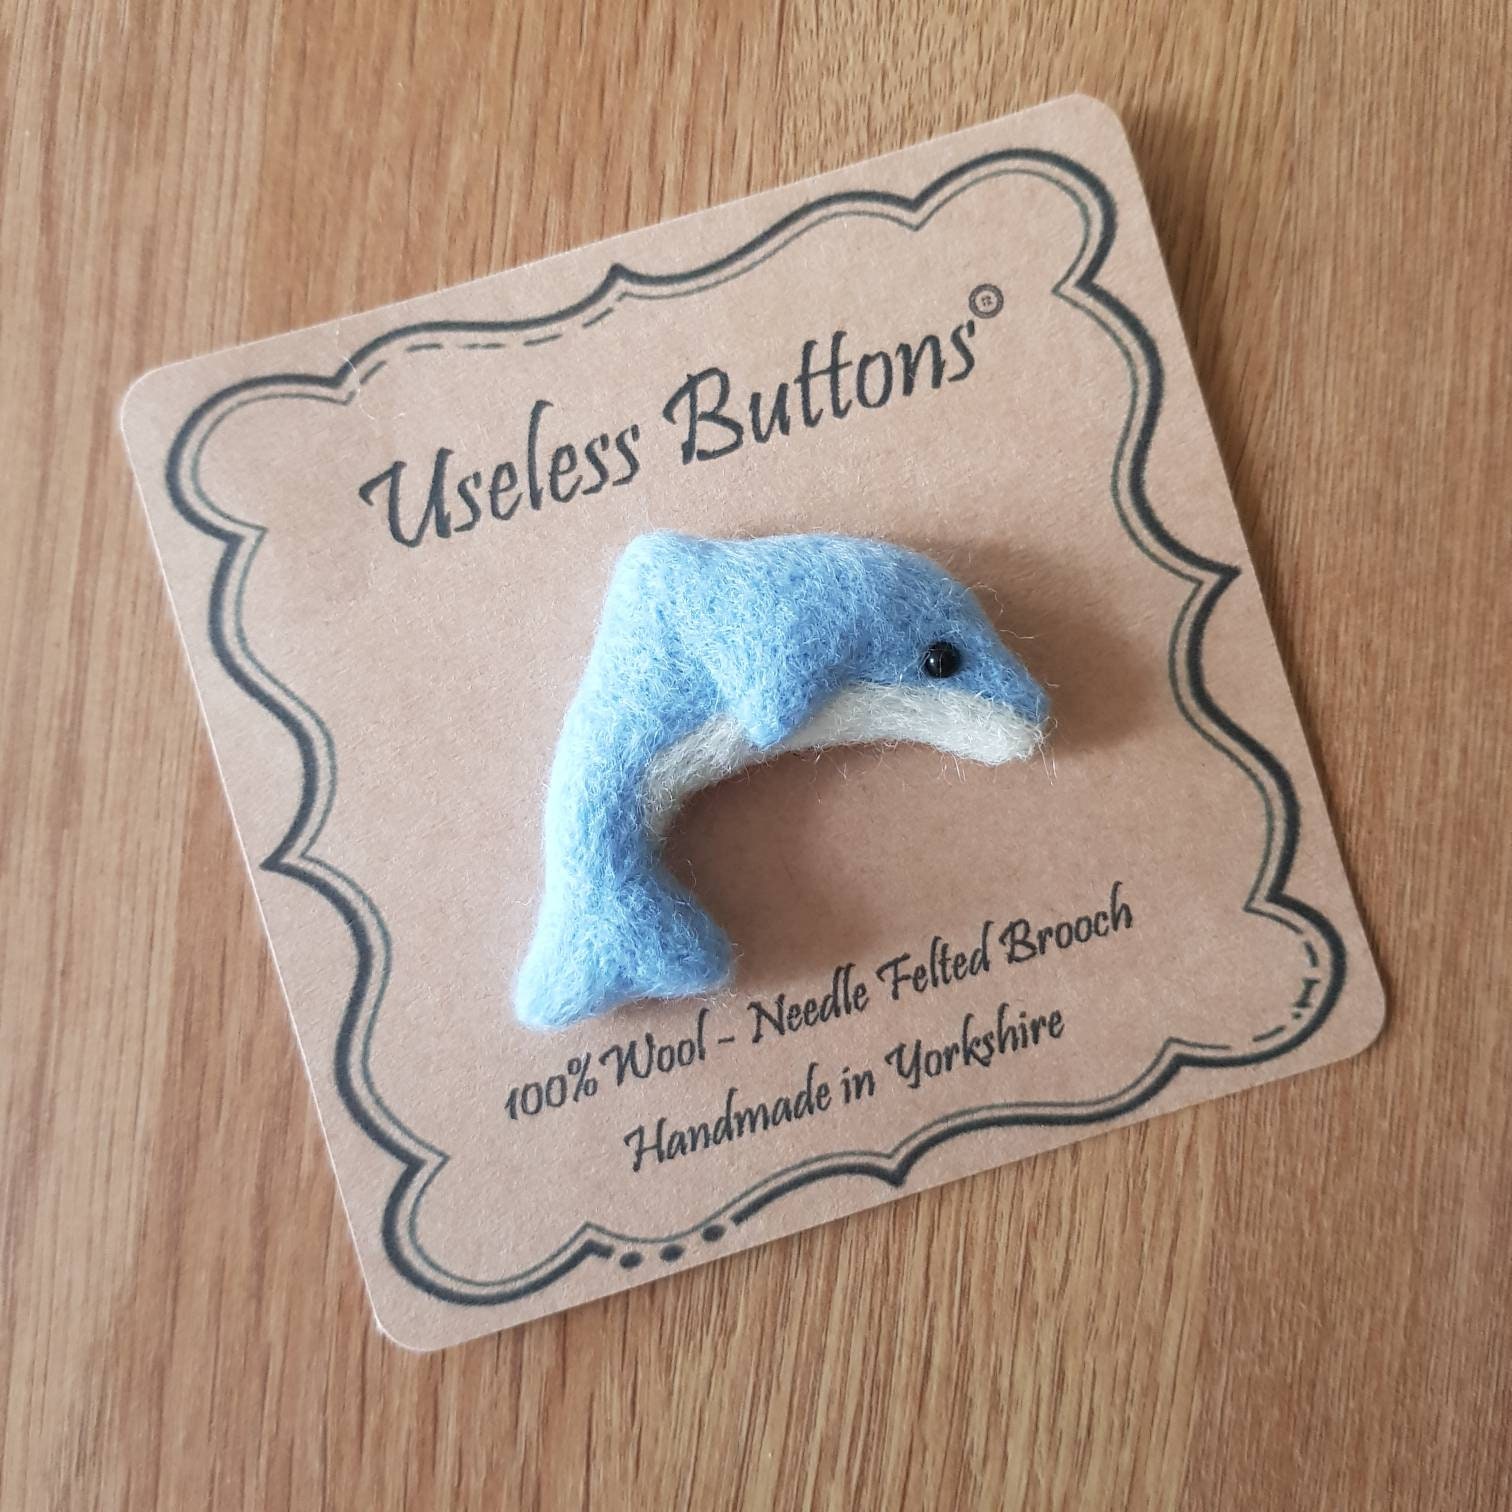 Personalised Teacher Gift Needle Felted Dolphin Brooch Handmade in Blue & White Wool. Cute Felt Porpoise Pin